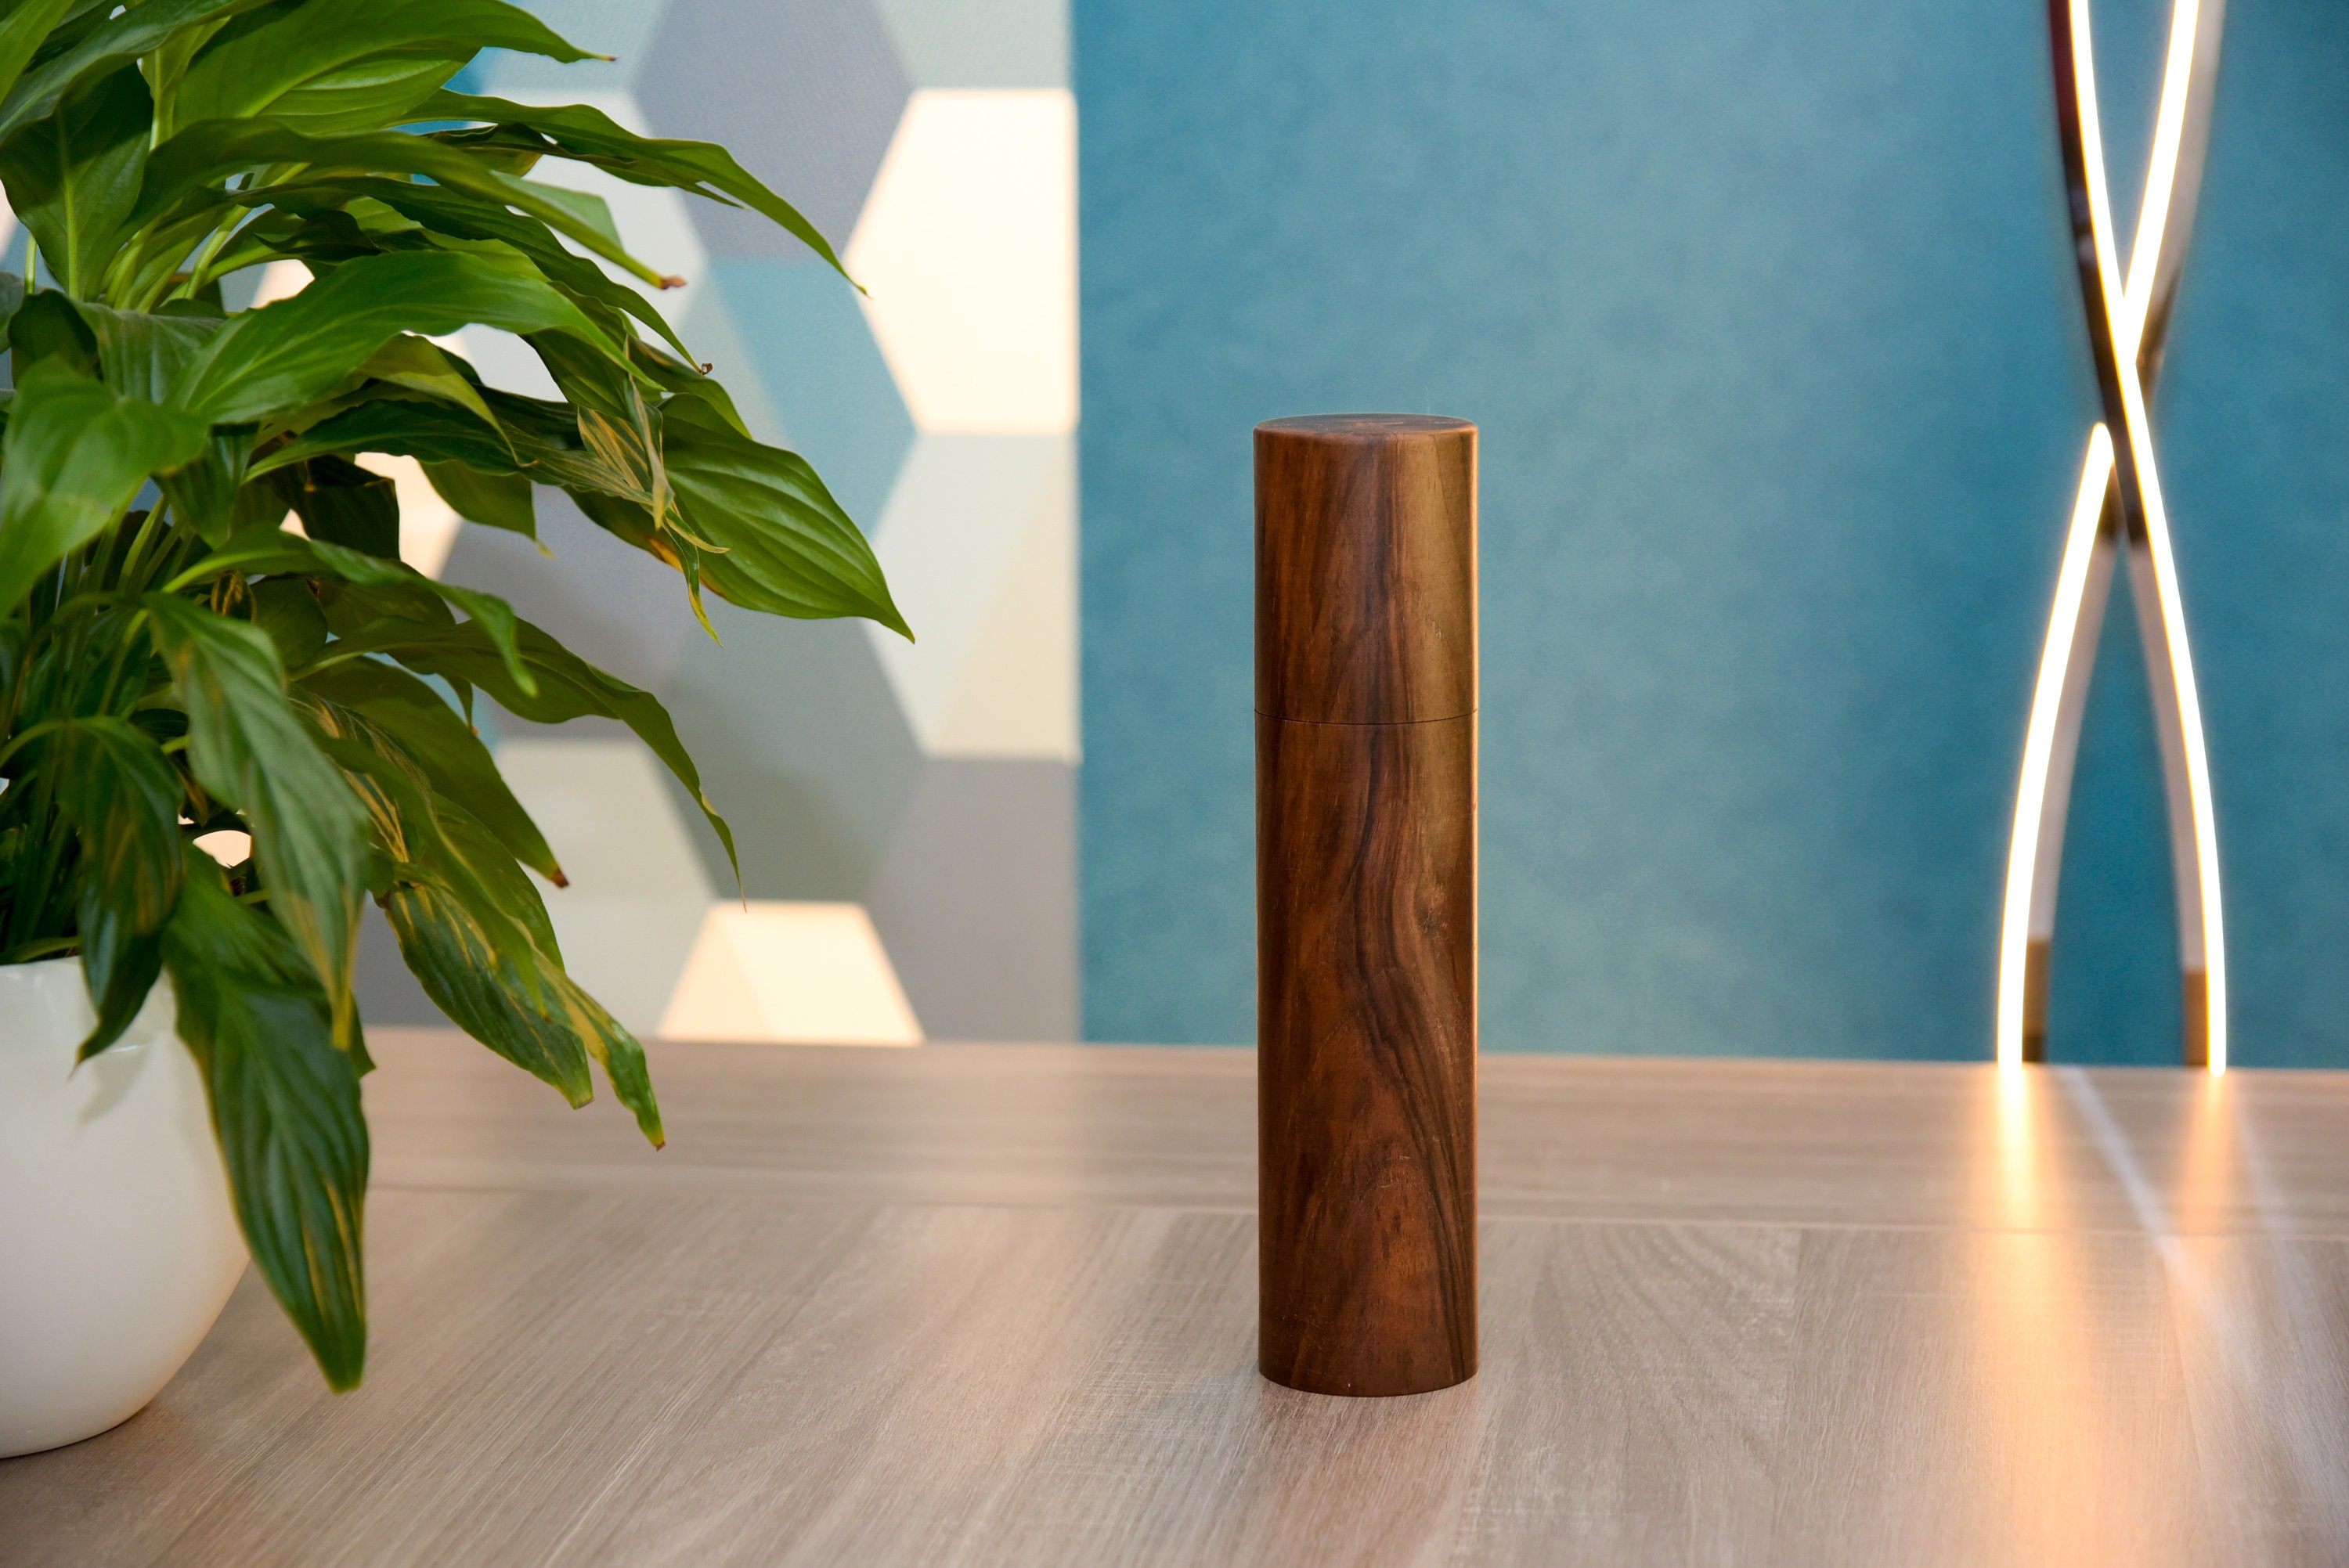 On a gray wooden surface lie spices, hand-made wooden pepper mill